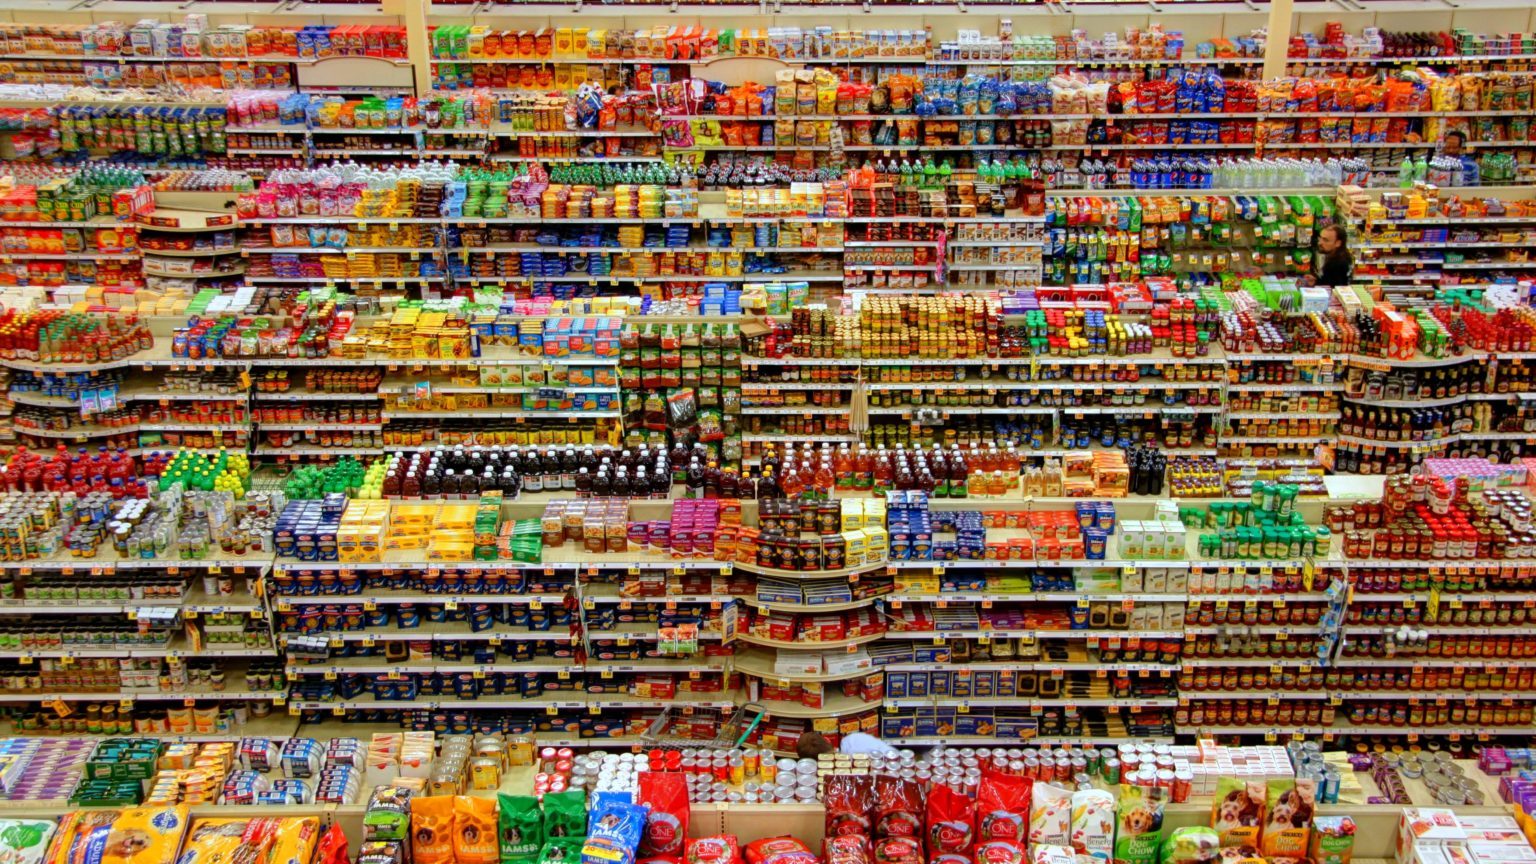 Aisles and shelves filled with various food products.